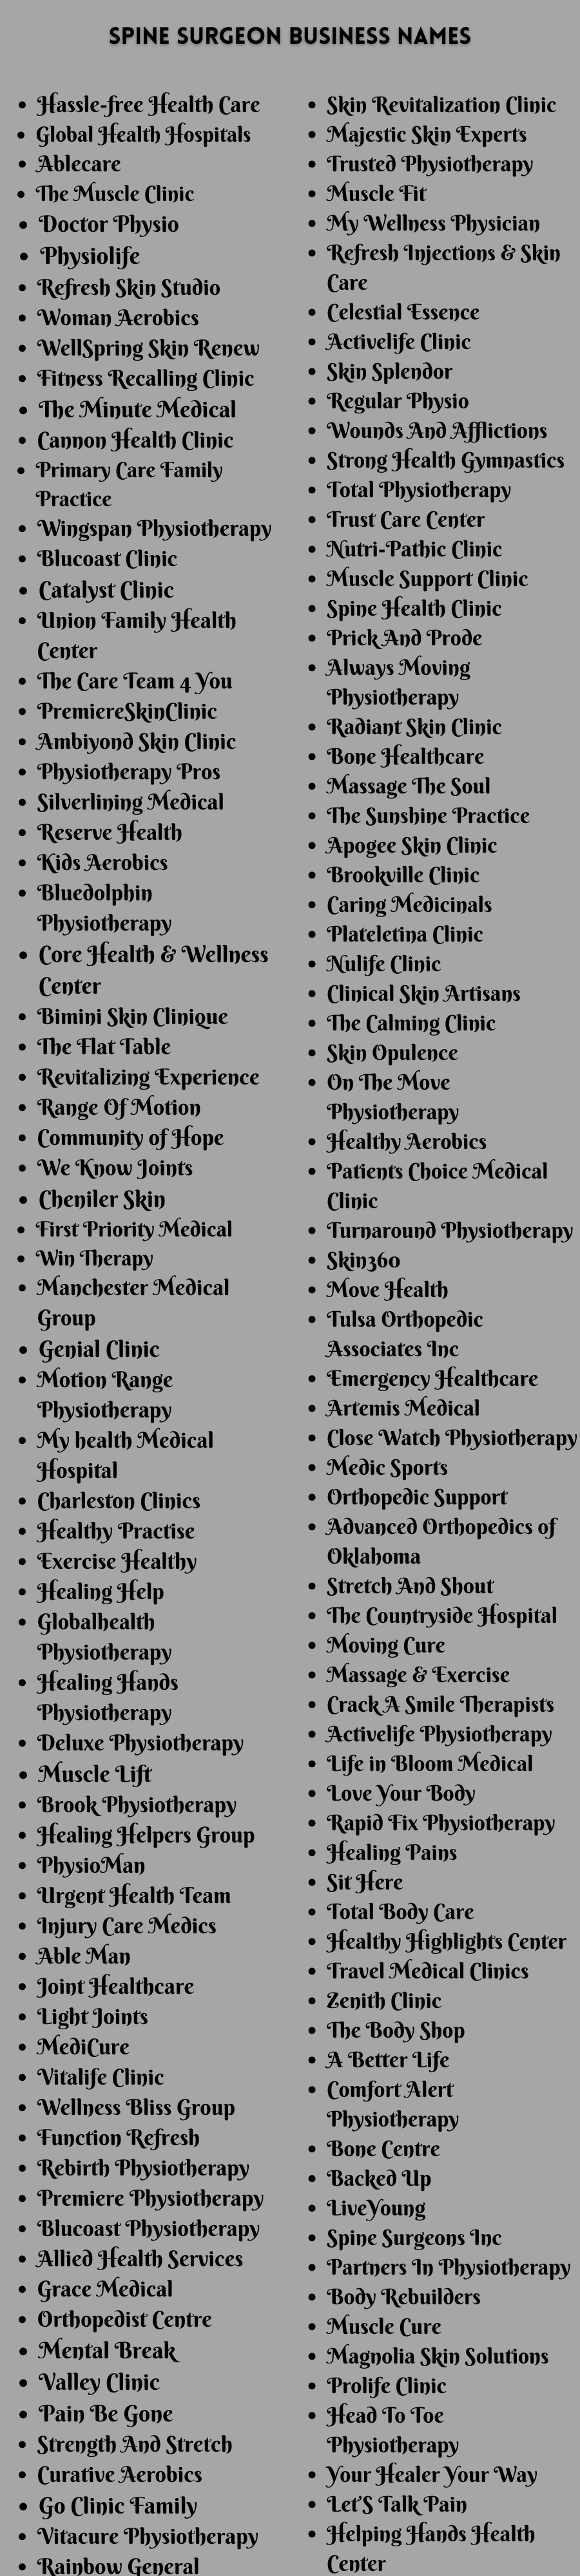 400 Spine Surgeon Business Names Ideas & Suggestions